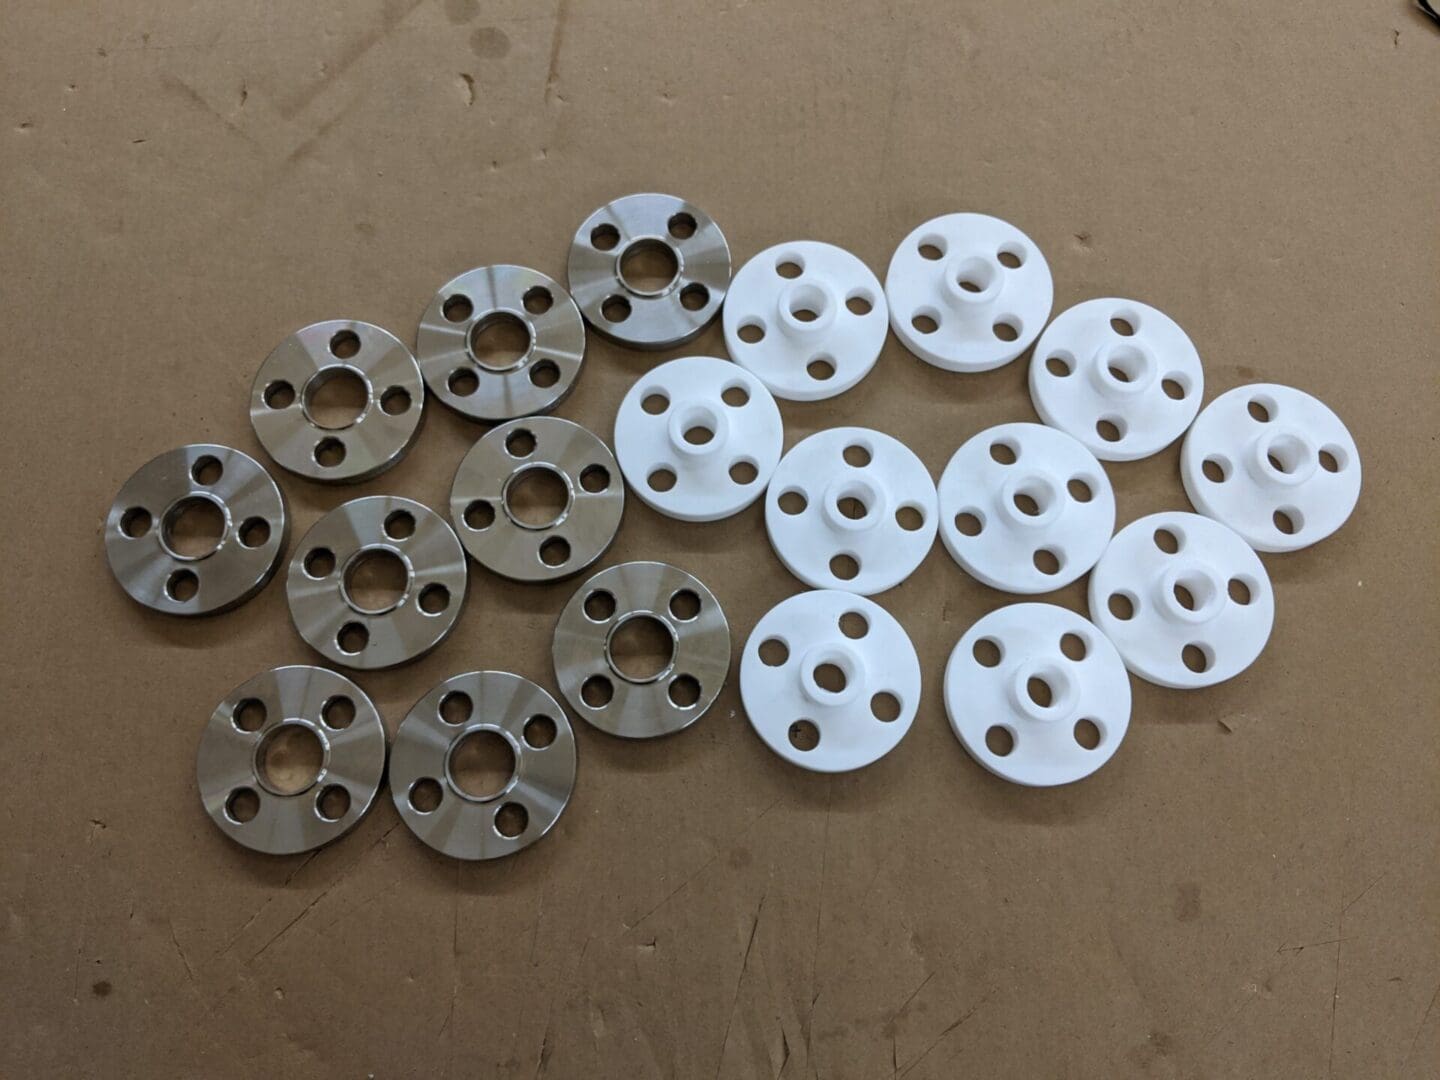 A group of metal discs with holes in them.